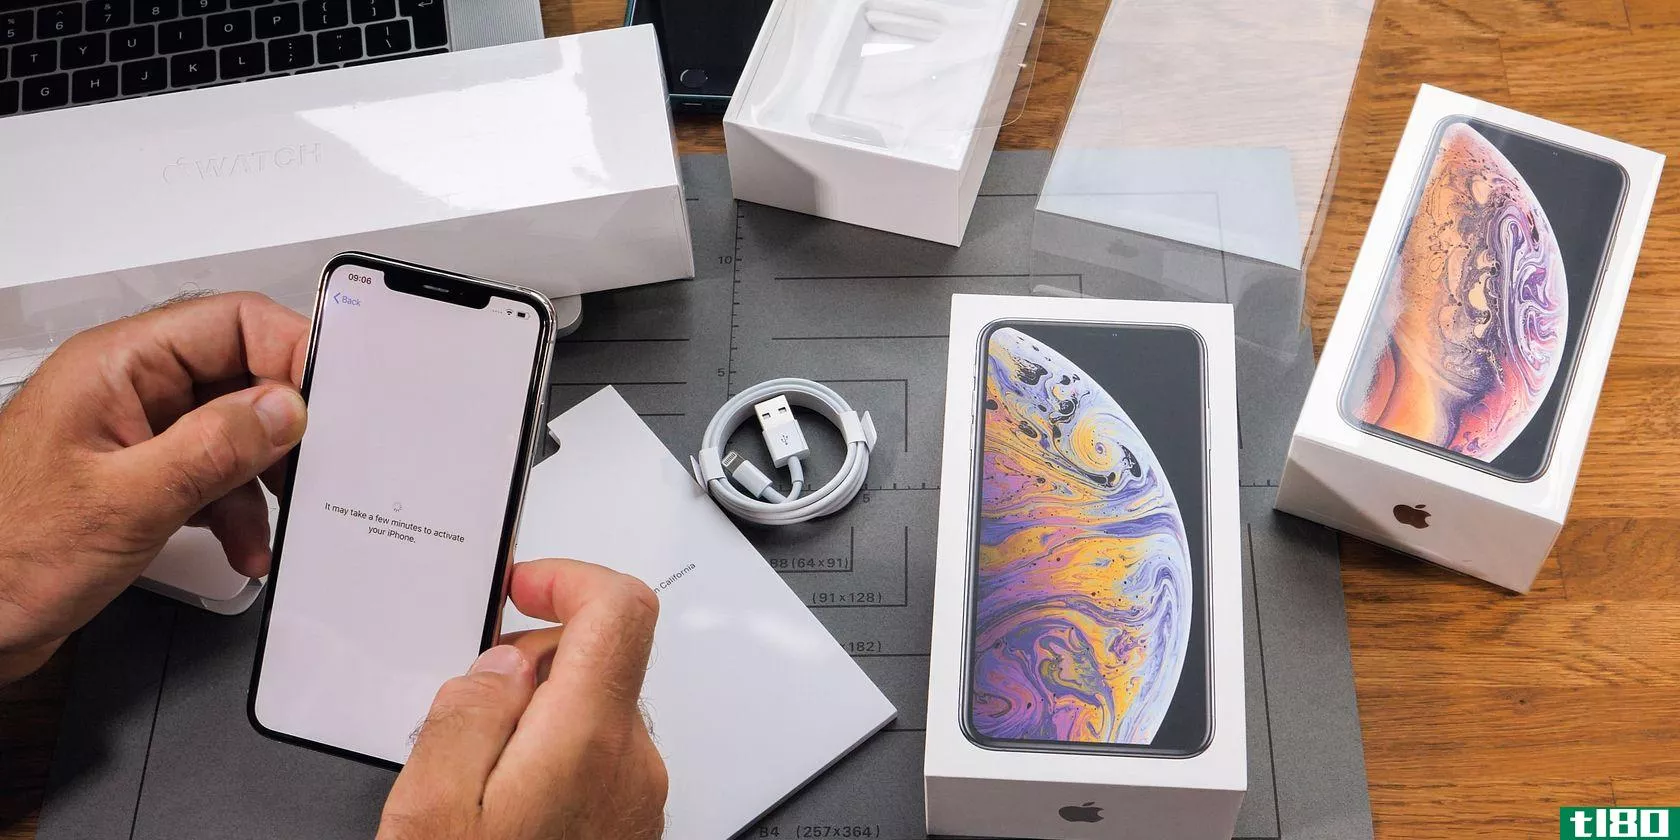 man-unboxing-iphone-xs-max-xr-activation-of-the-phone